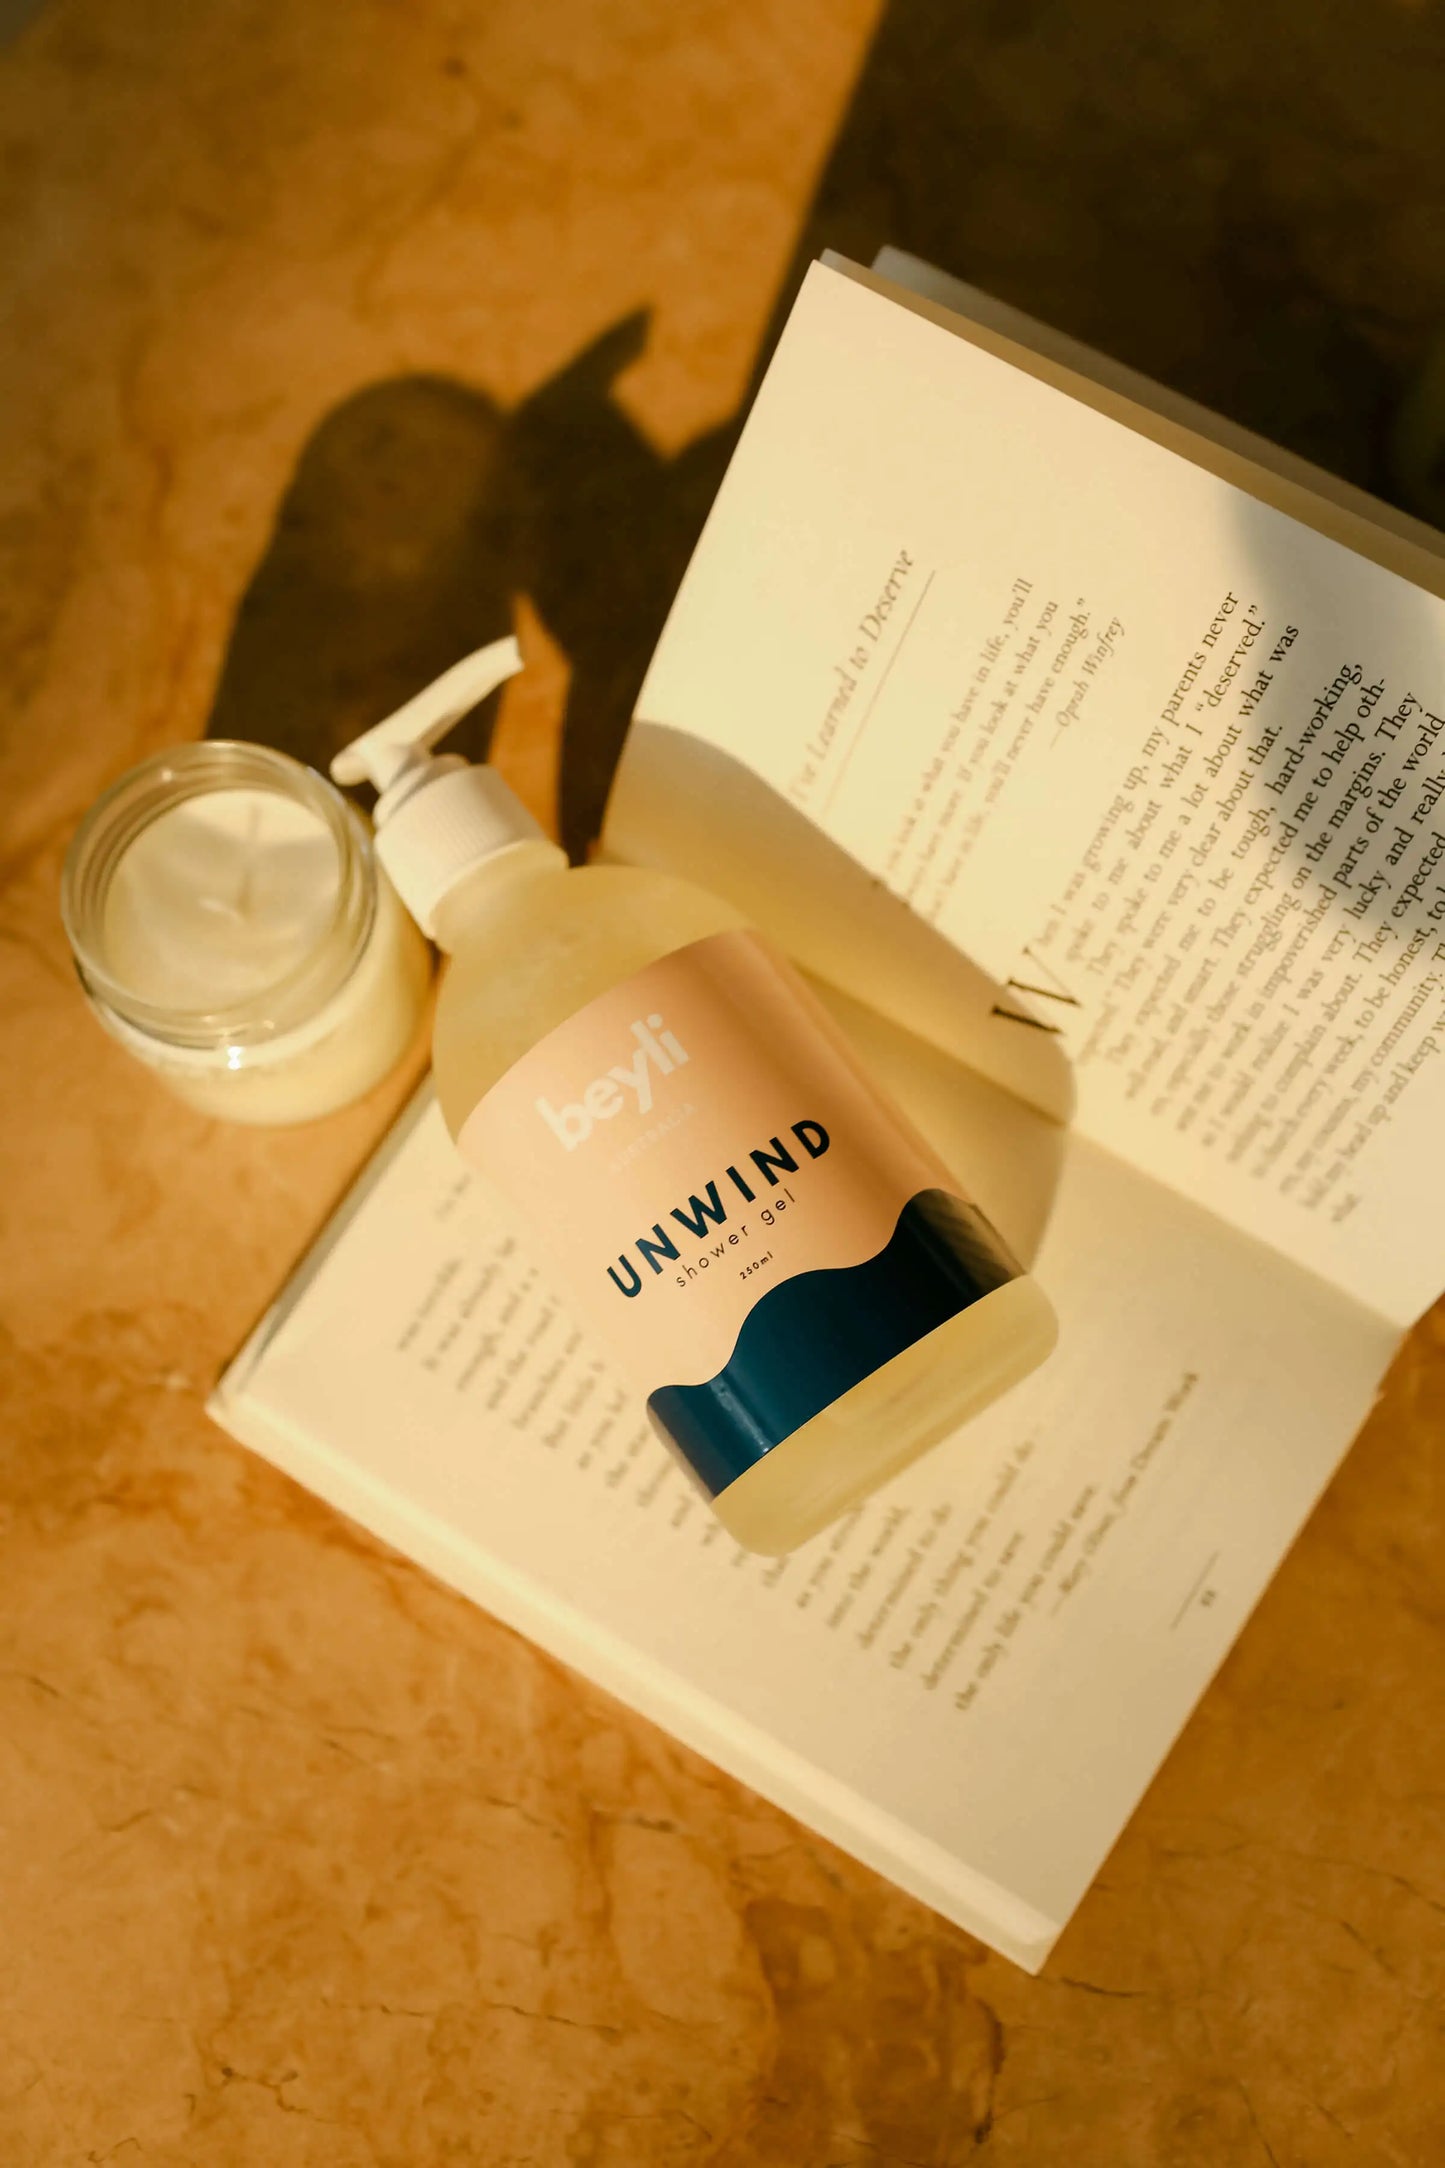 A sleep-enhancing mist and mask set presented next to a bedtime reading book